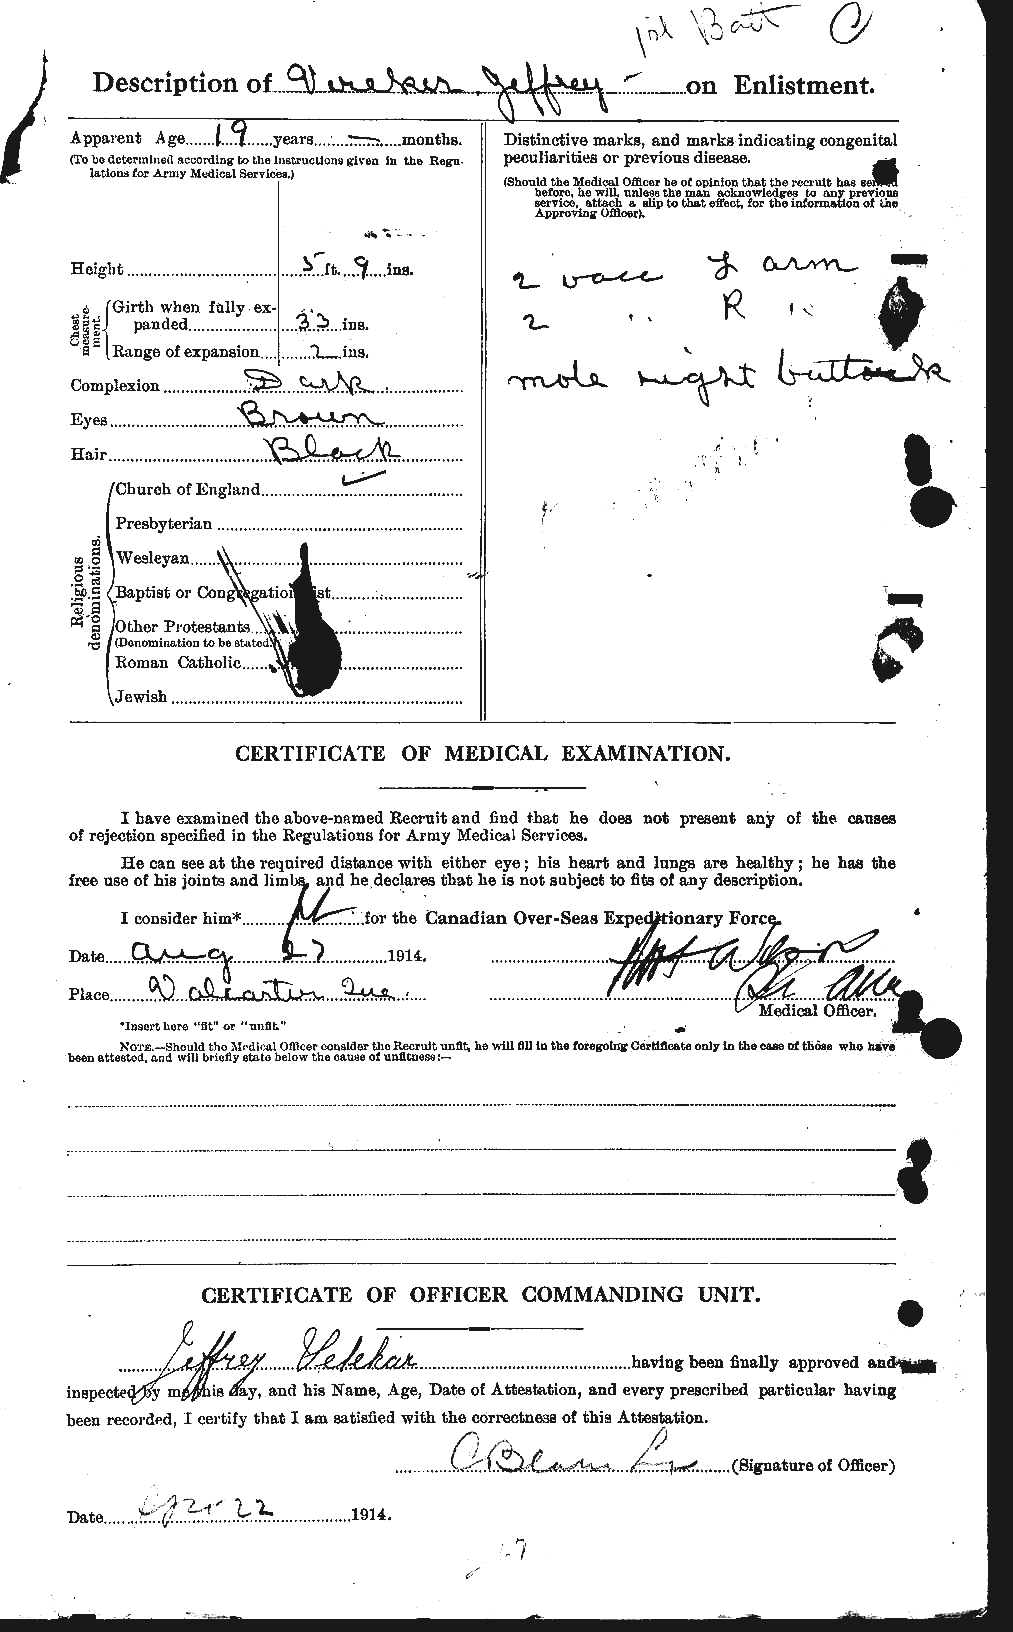 Personnel Records of the First World War - CEF 649445b